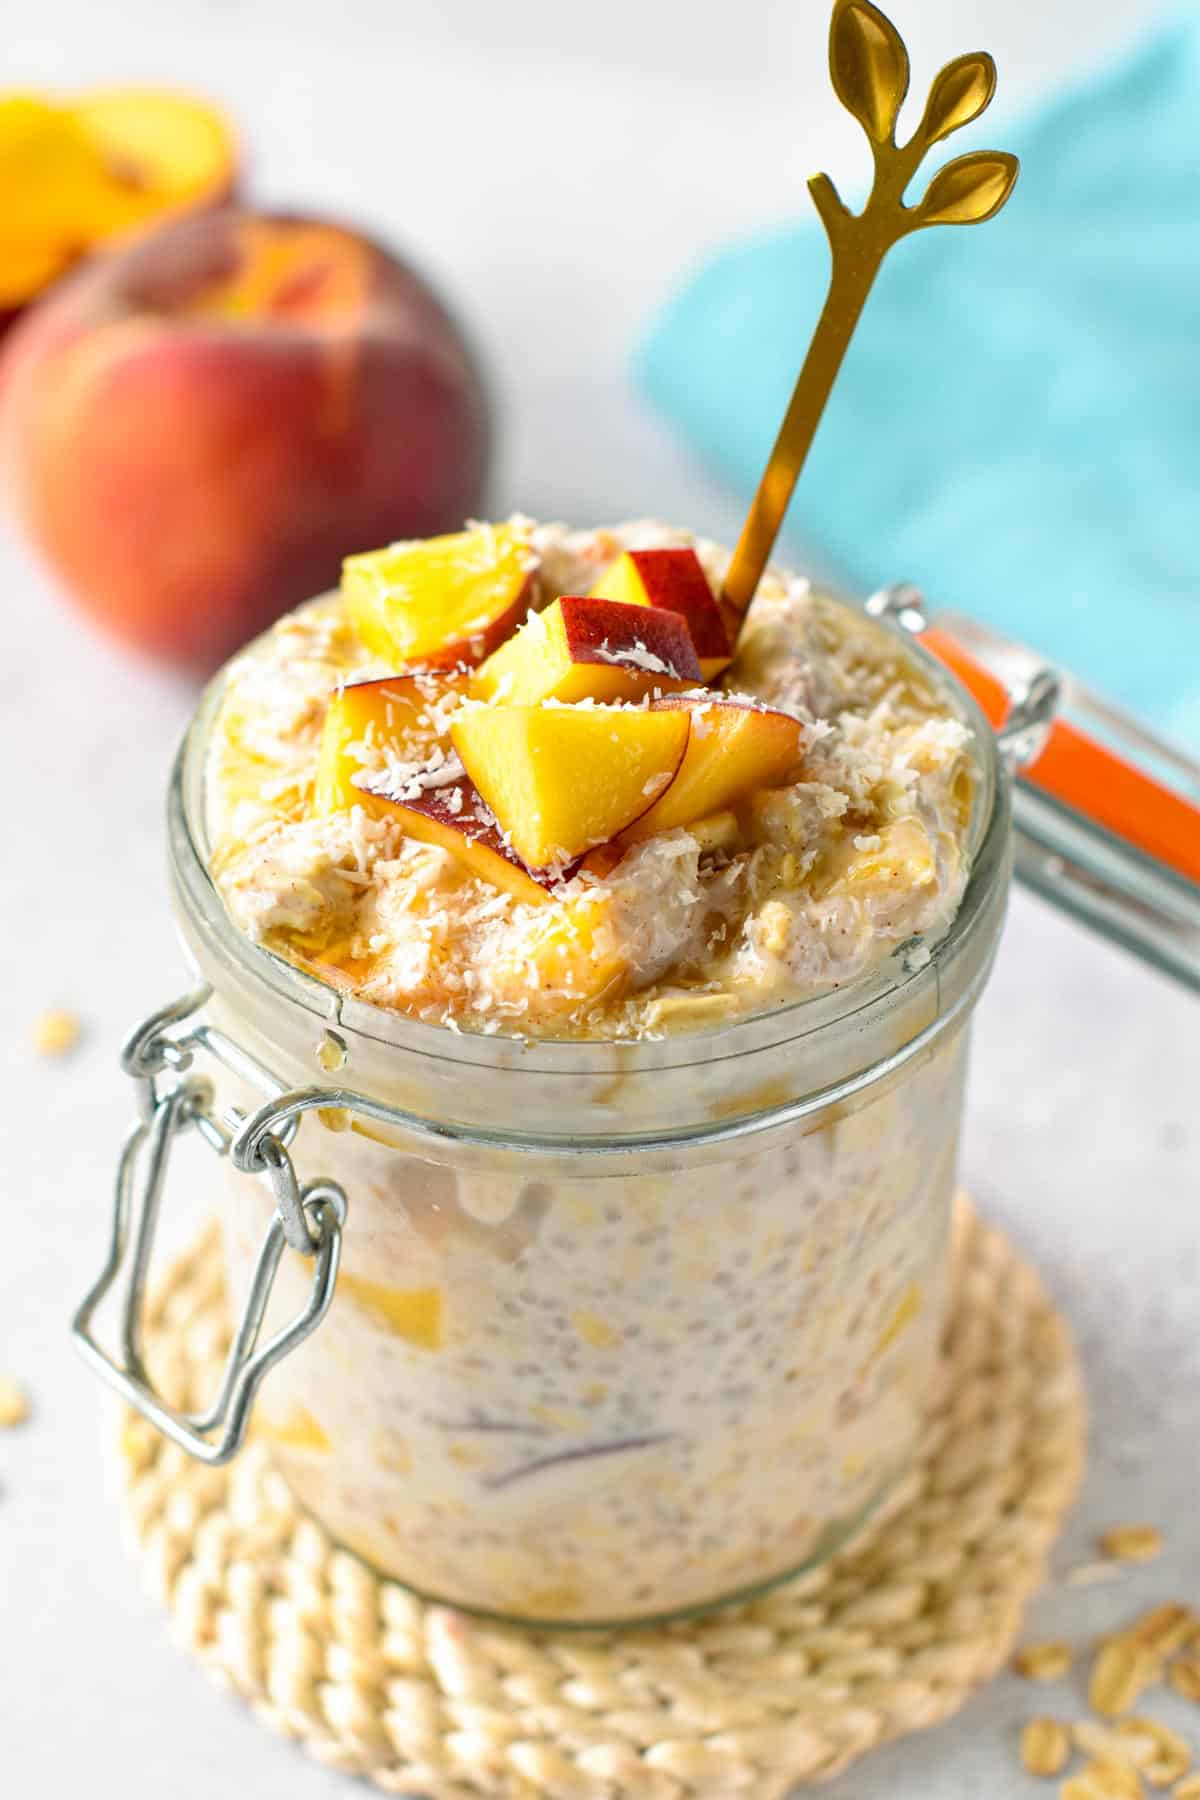  This Peach Overnights Oats recipe is a delicious creamy, refreshing healthy breakfast with fresh peaches. Plus, it's a naturally plant-based breakfast too with easy gluten-free option.